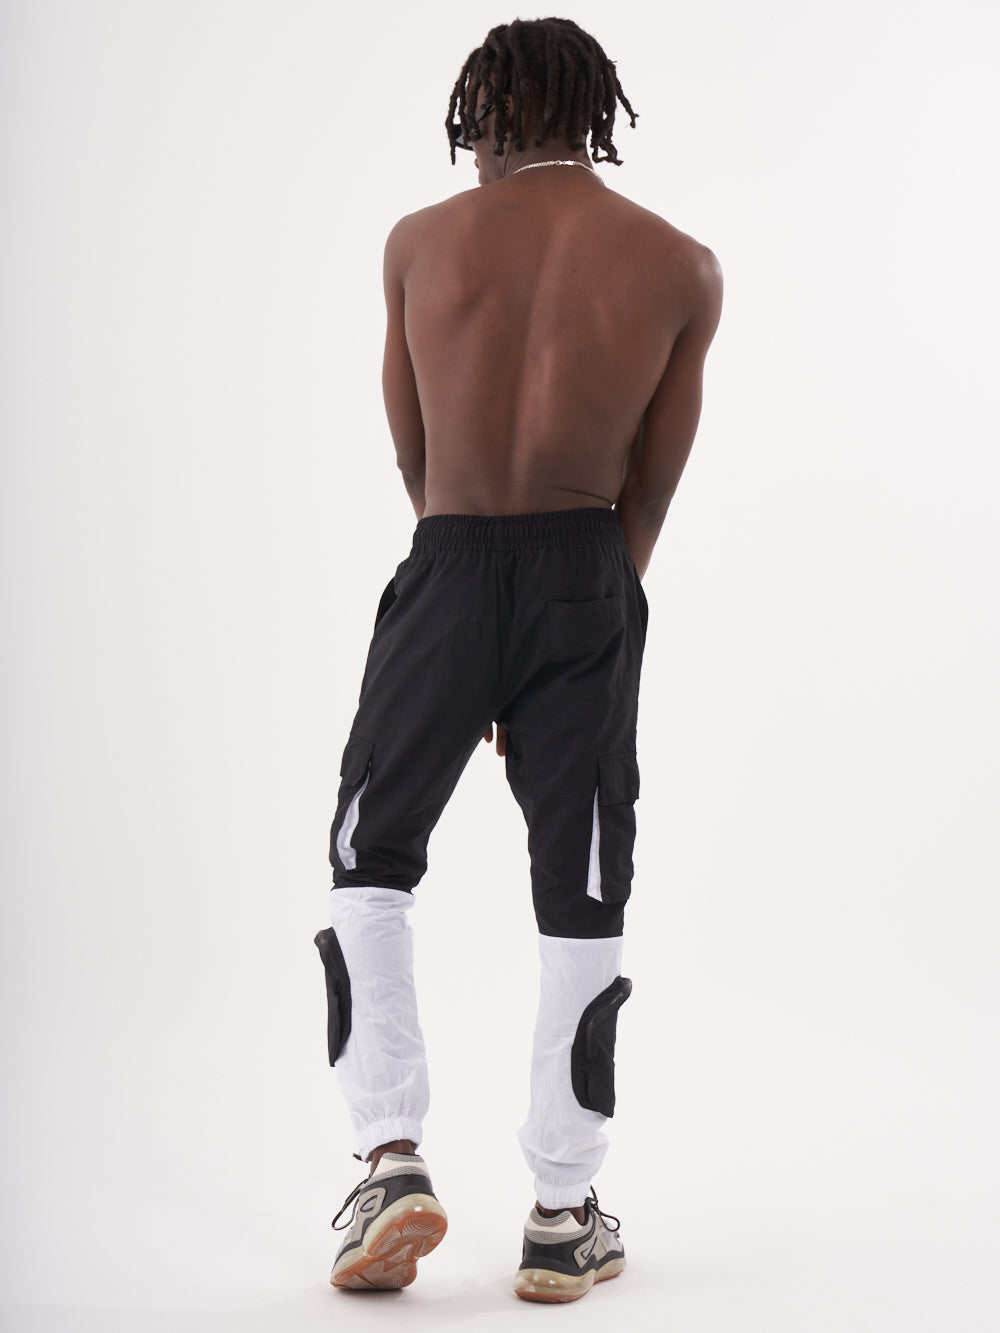 The back of a man wearing RENEGADE | BLACK track pants.